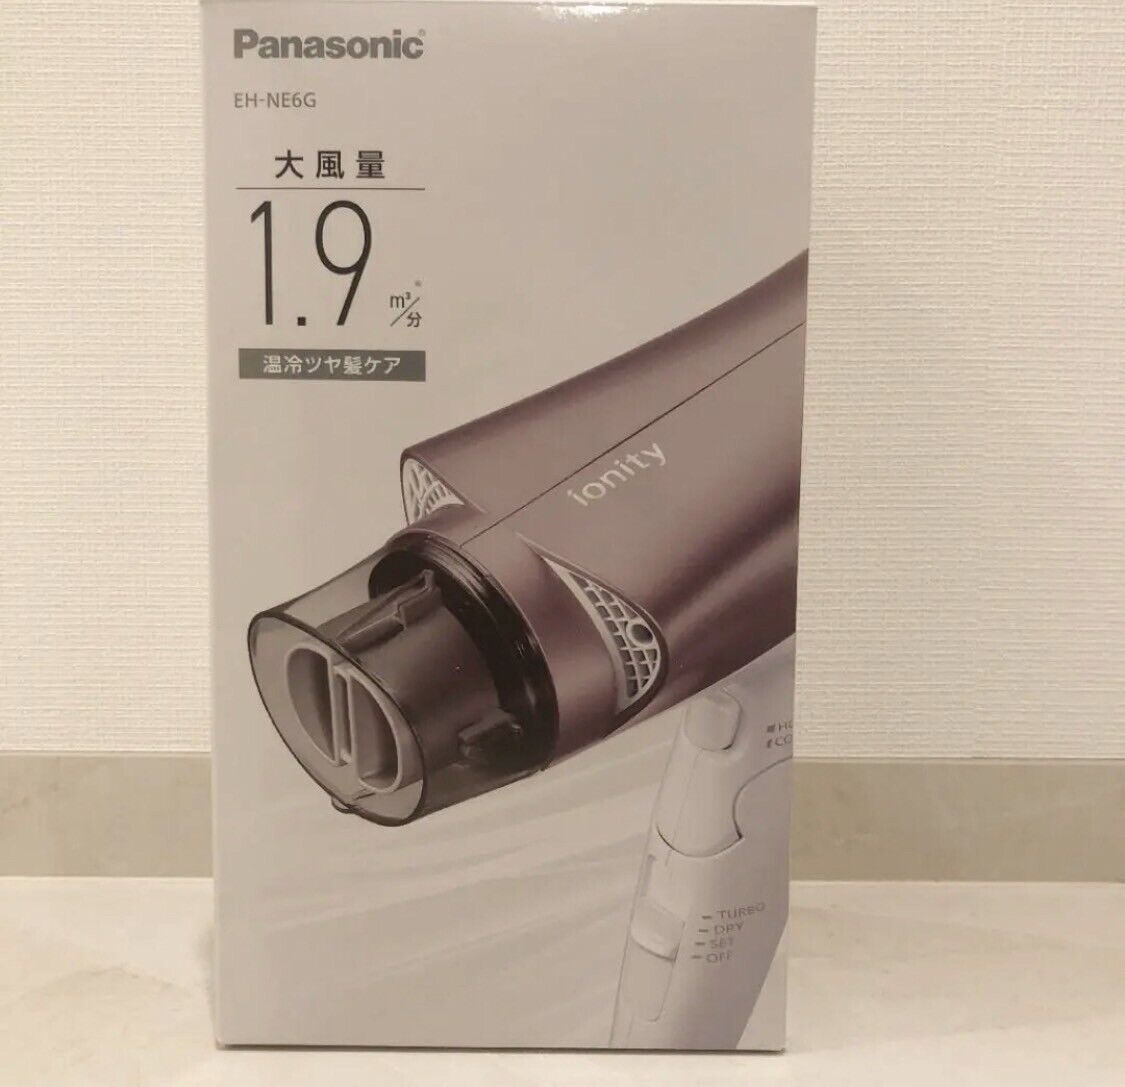 EH-NE6G-T Panasonic Dryer Ionity Fast Dry Great Wind Dry Brown Tone New